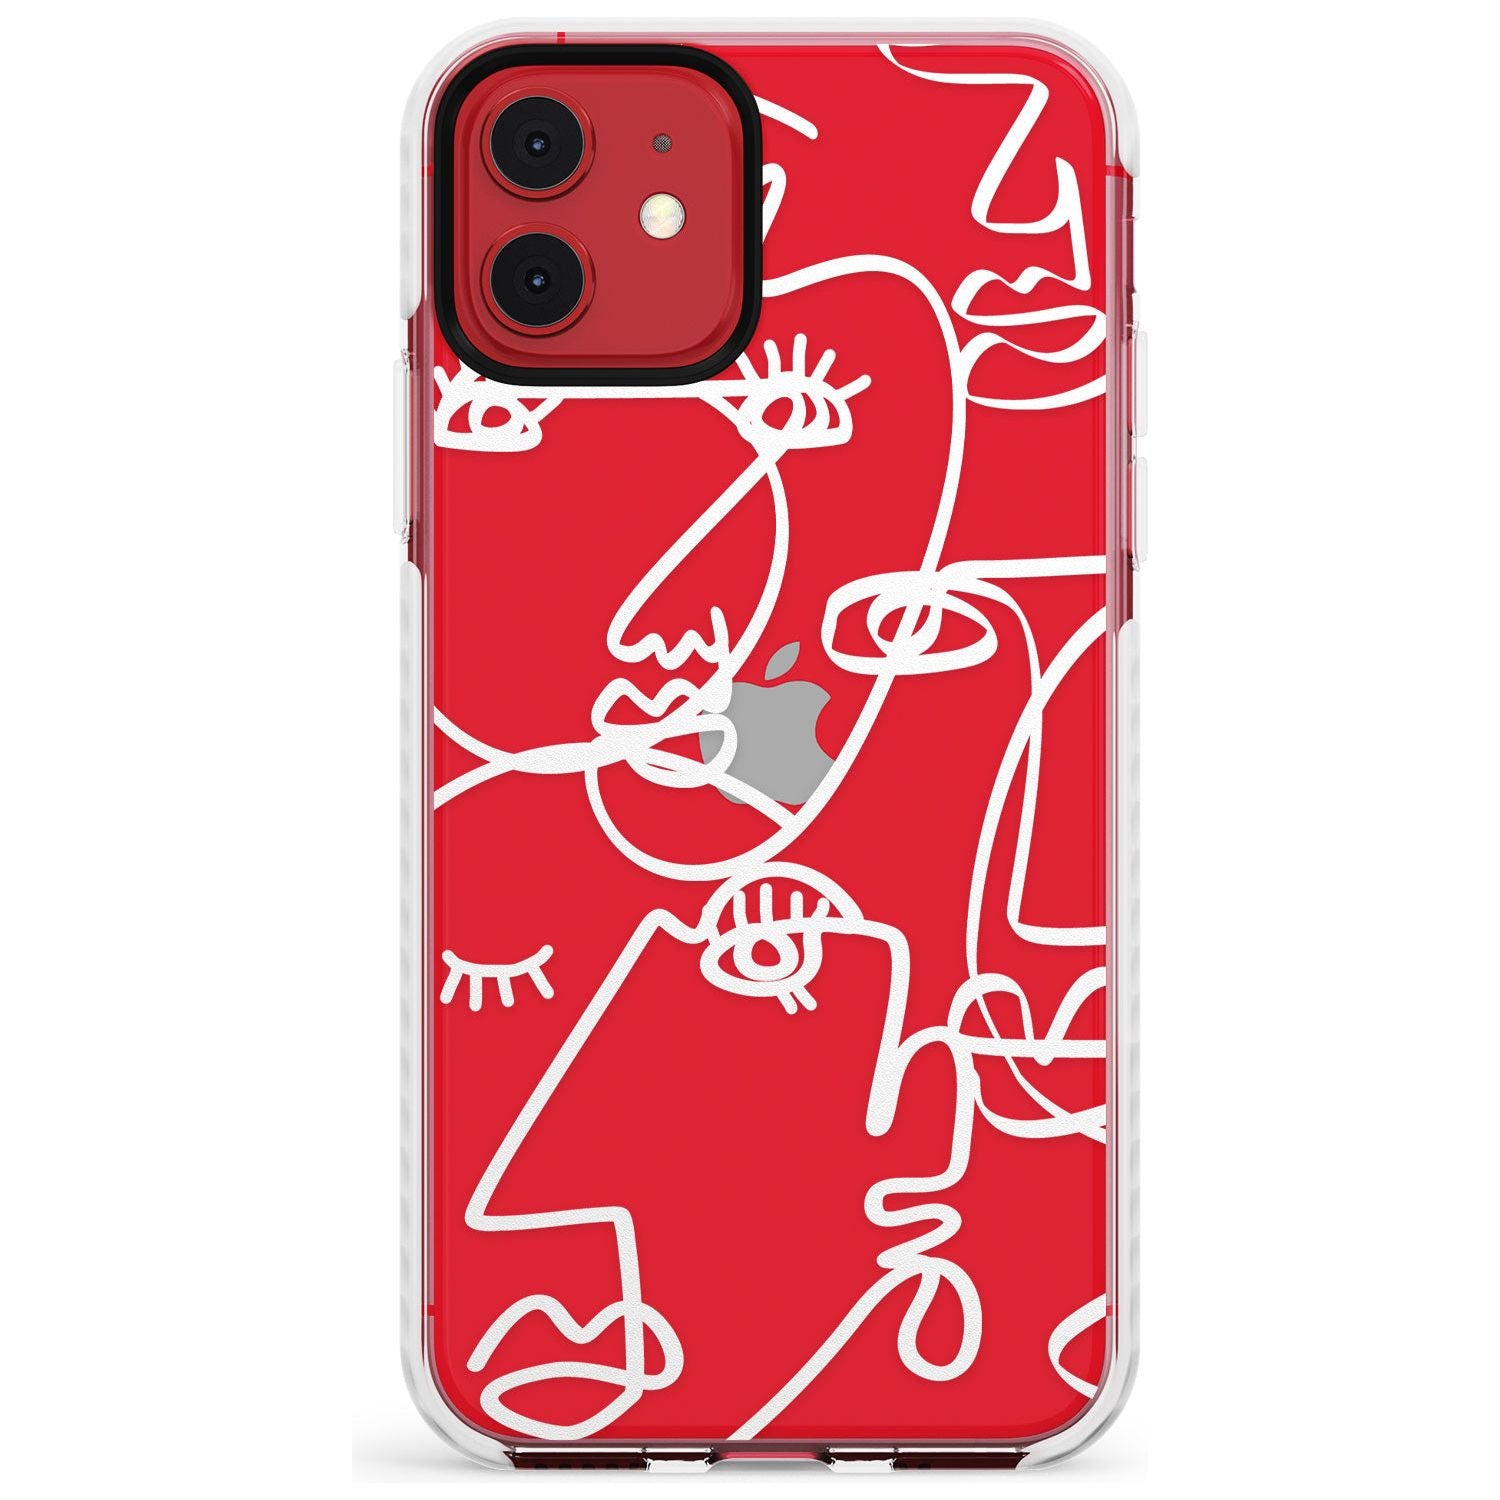 Continuous Line Faces: White on Clear Slim TPU Phone Case for iPhone 11